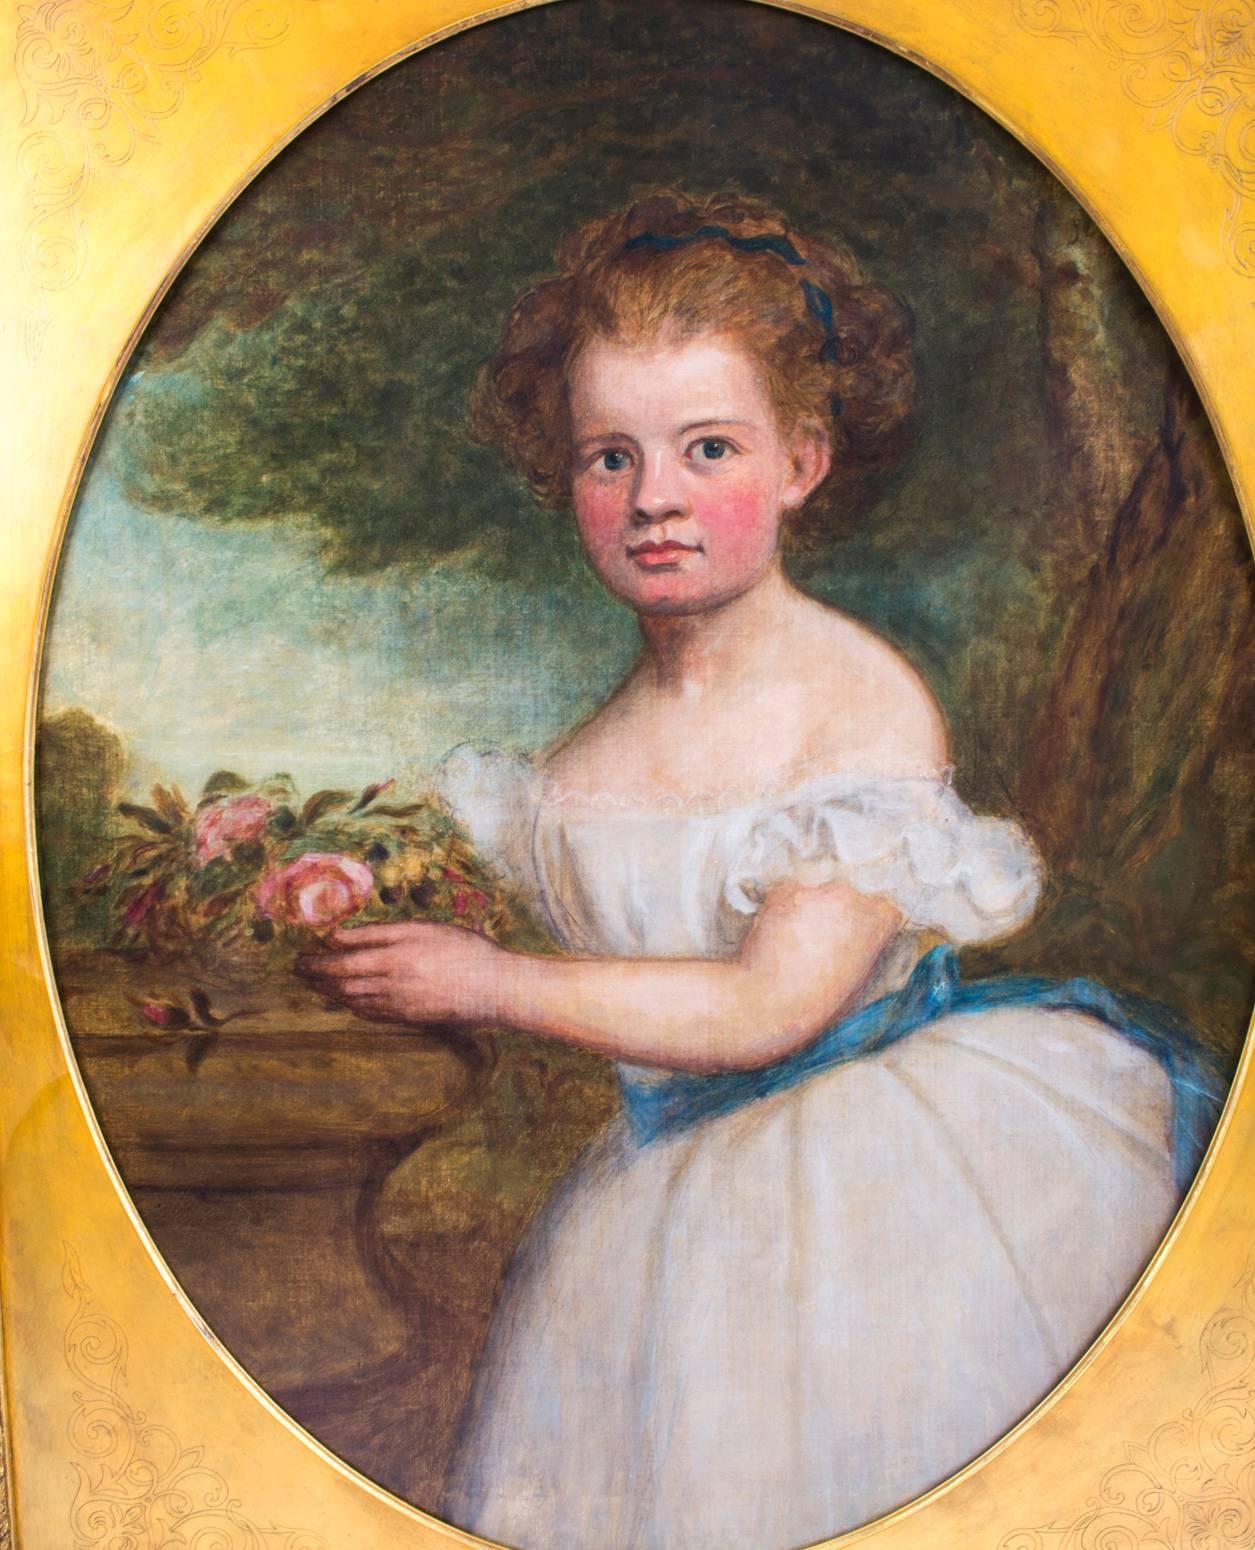 Superb oil on canvas portrait of a beautifully and meticulously rendered girl wearing a silk dress with a light blue wrap around her waist, dated 1866.

This beautiful bust length portrait of a young girl is set in a striking carved gilded